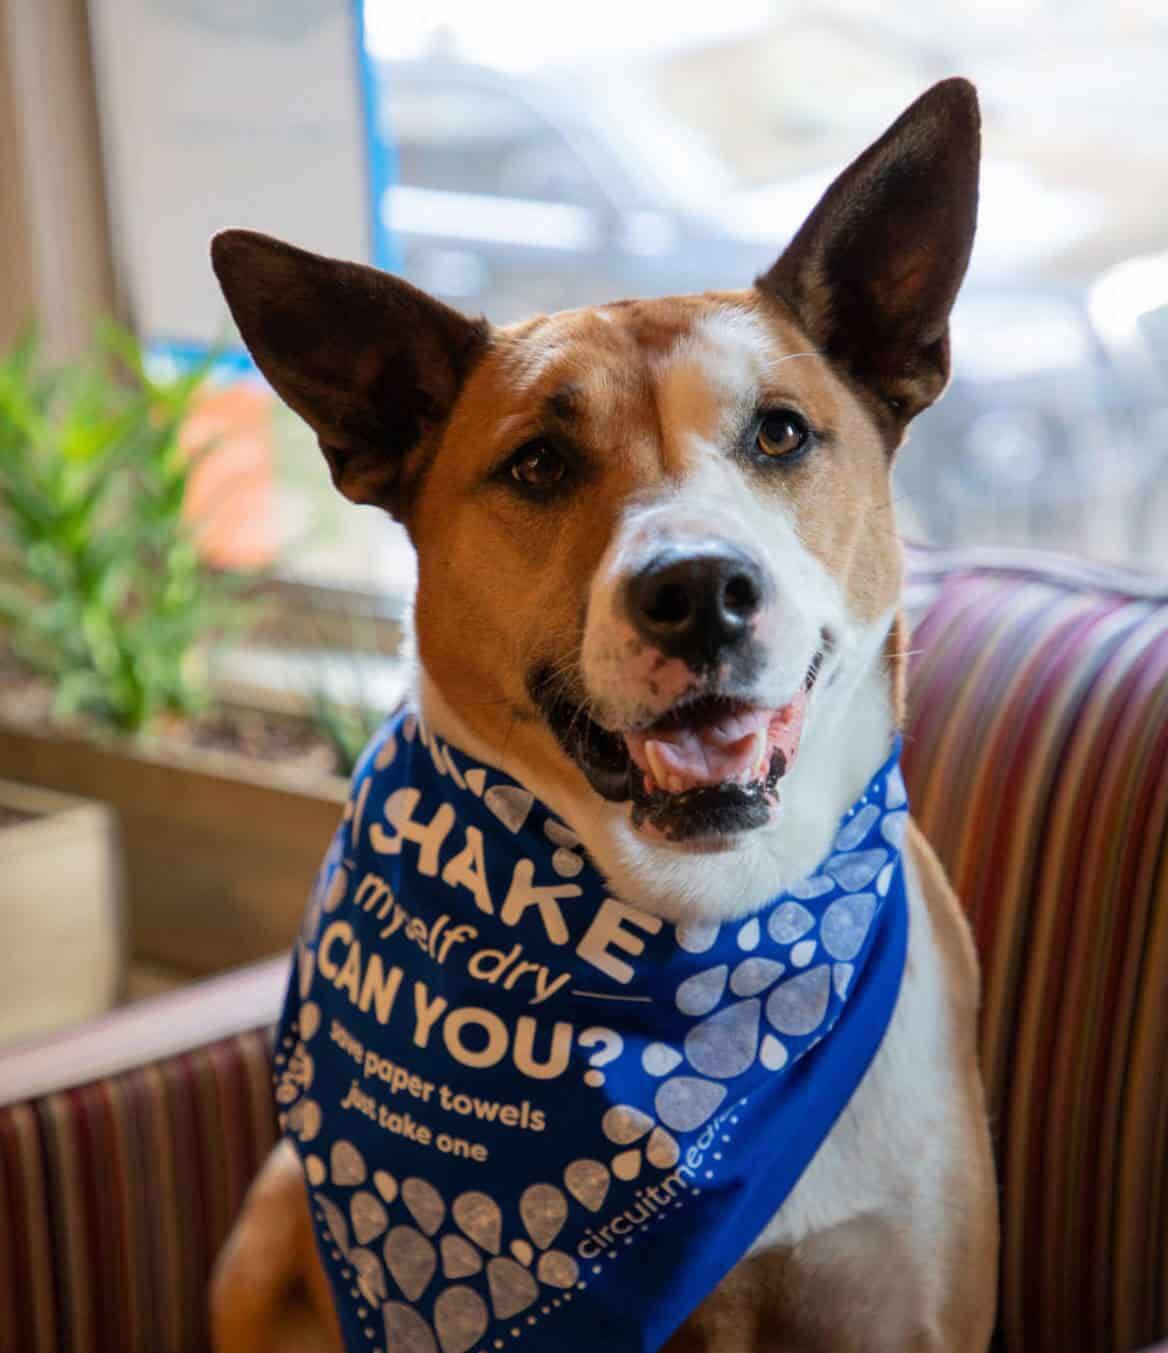 A brown and white dog with a blue bandana sitting on a couch